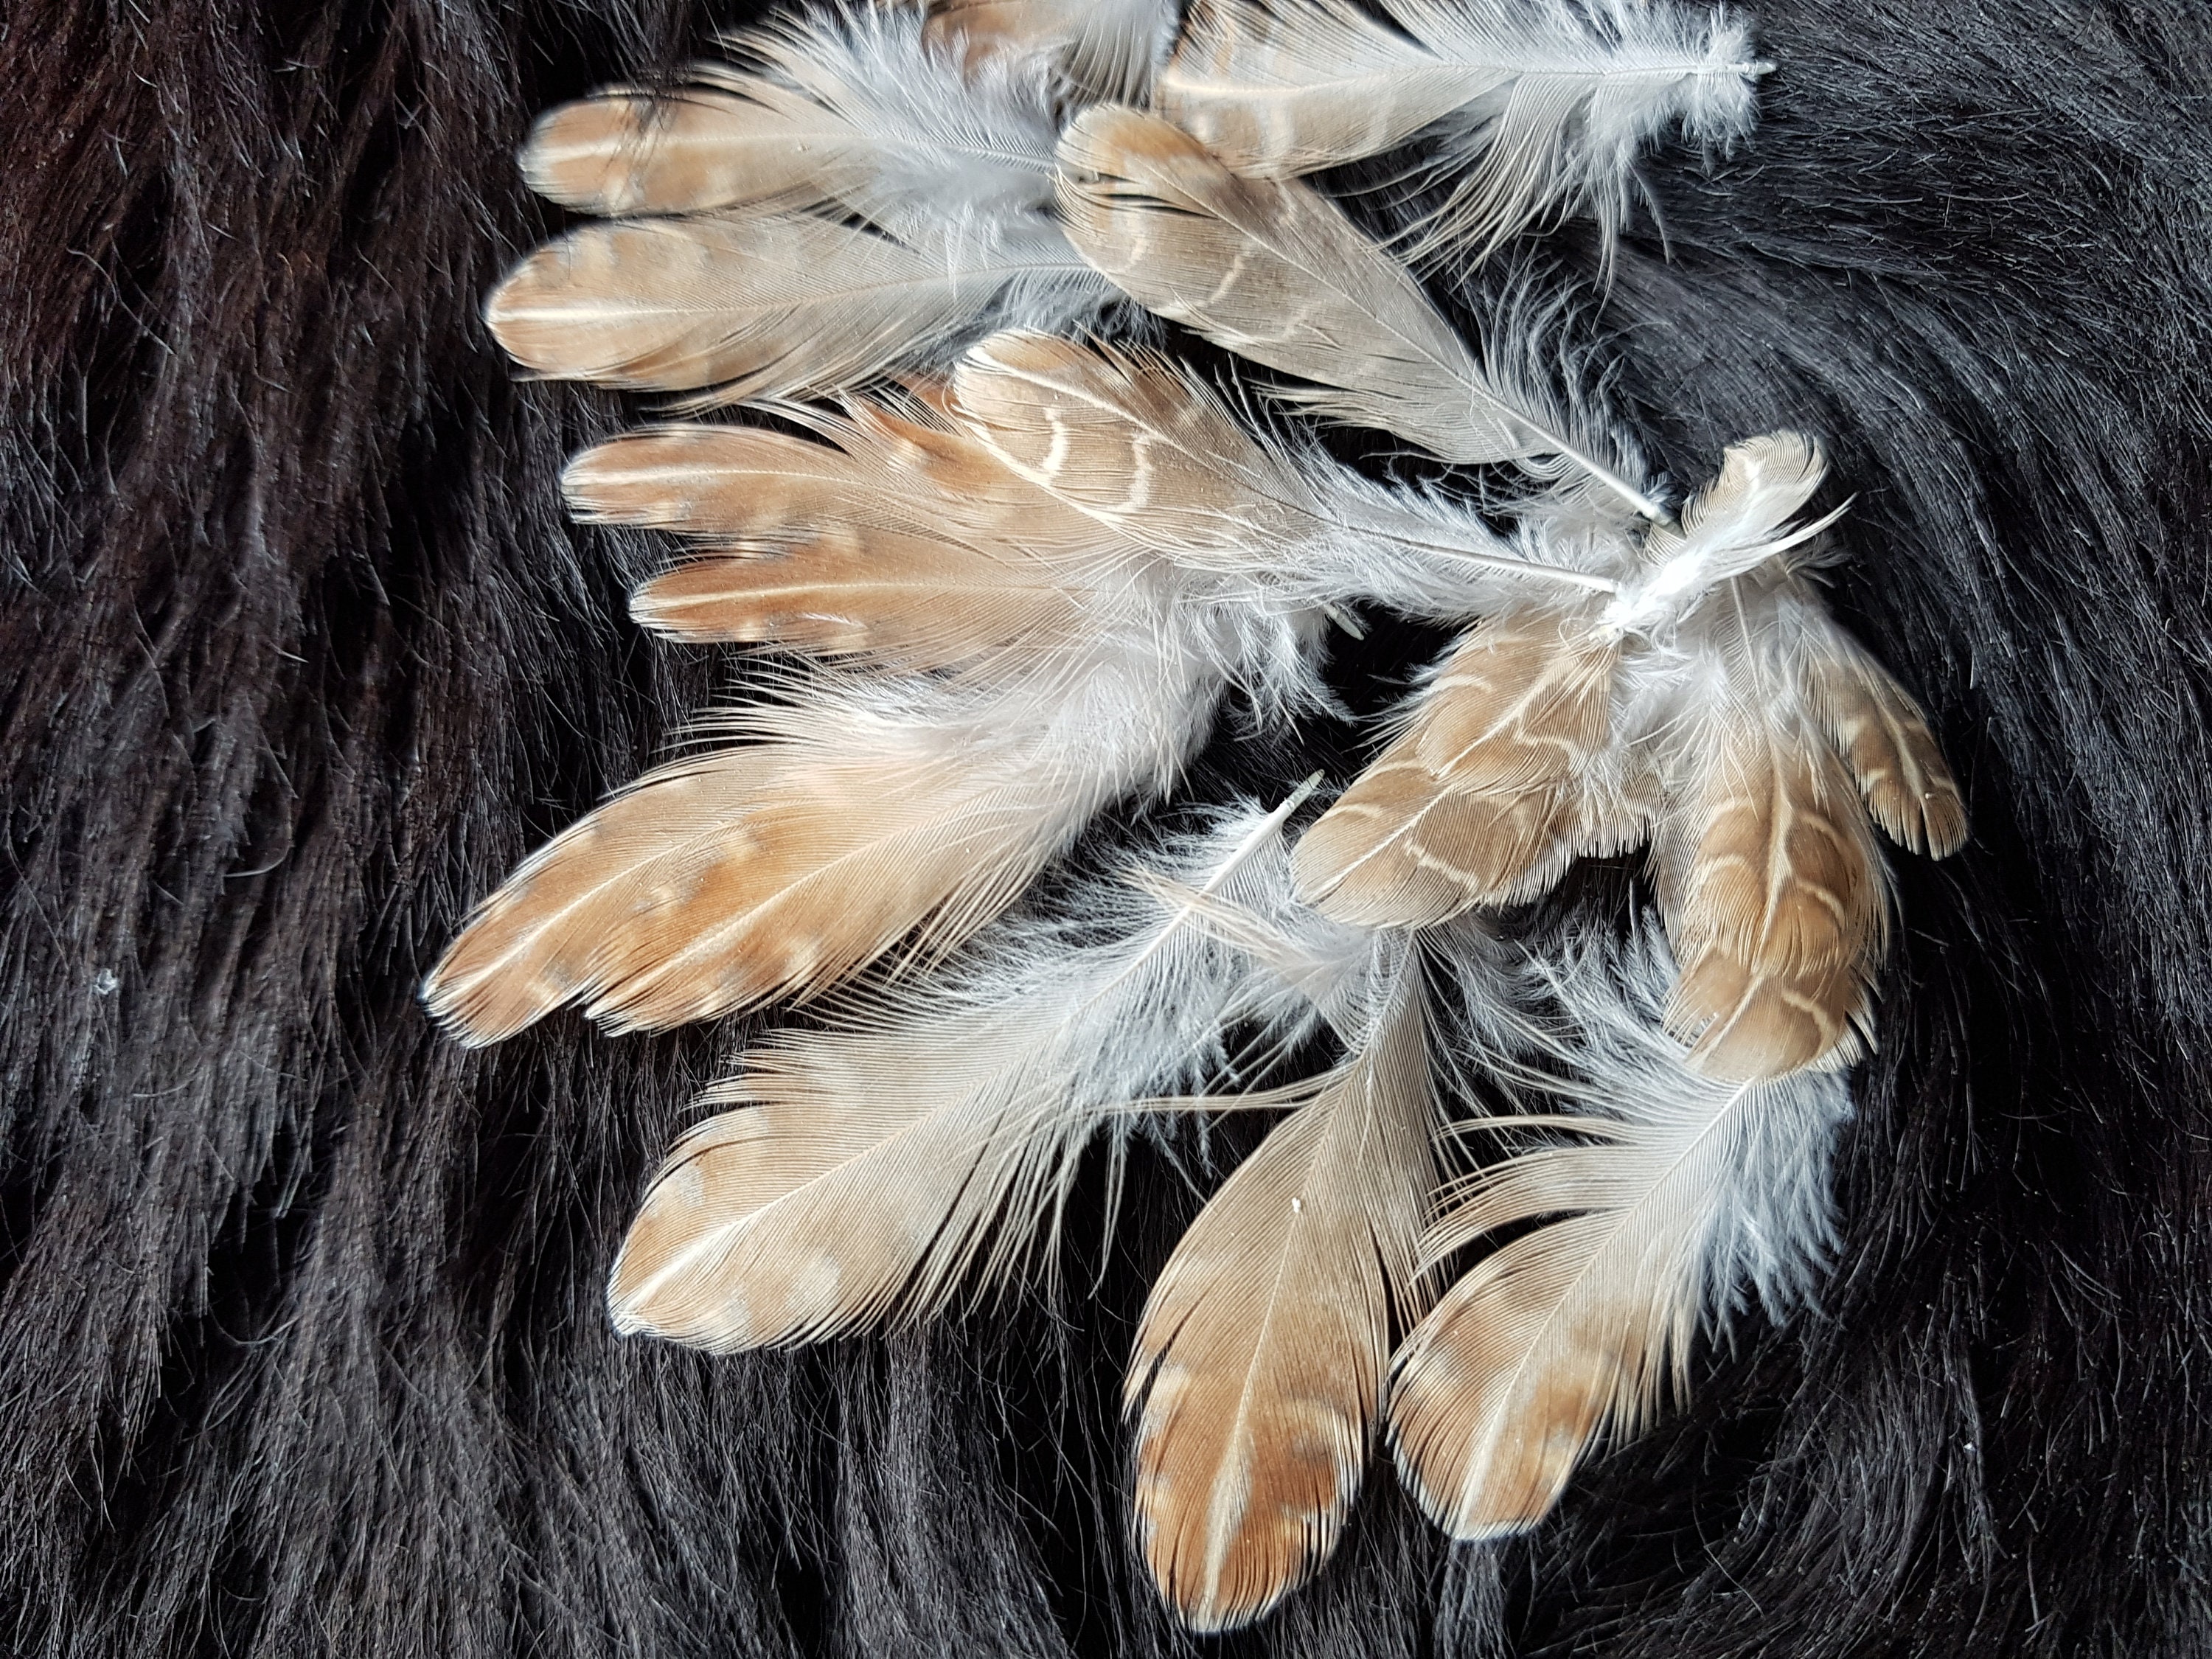 Craft Feathers Scrapbook Feathers Mixed Feather Bag Natural